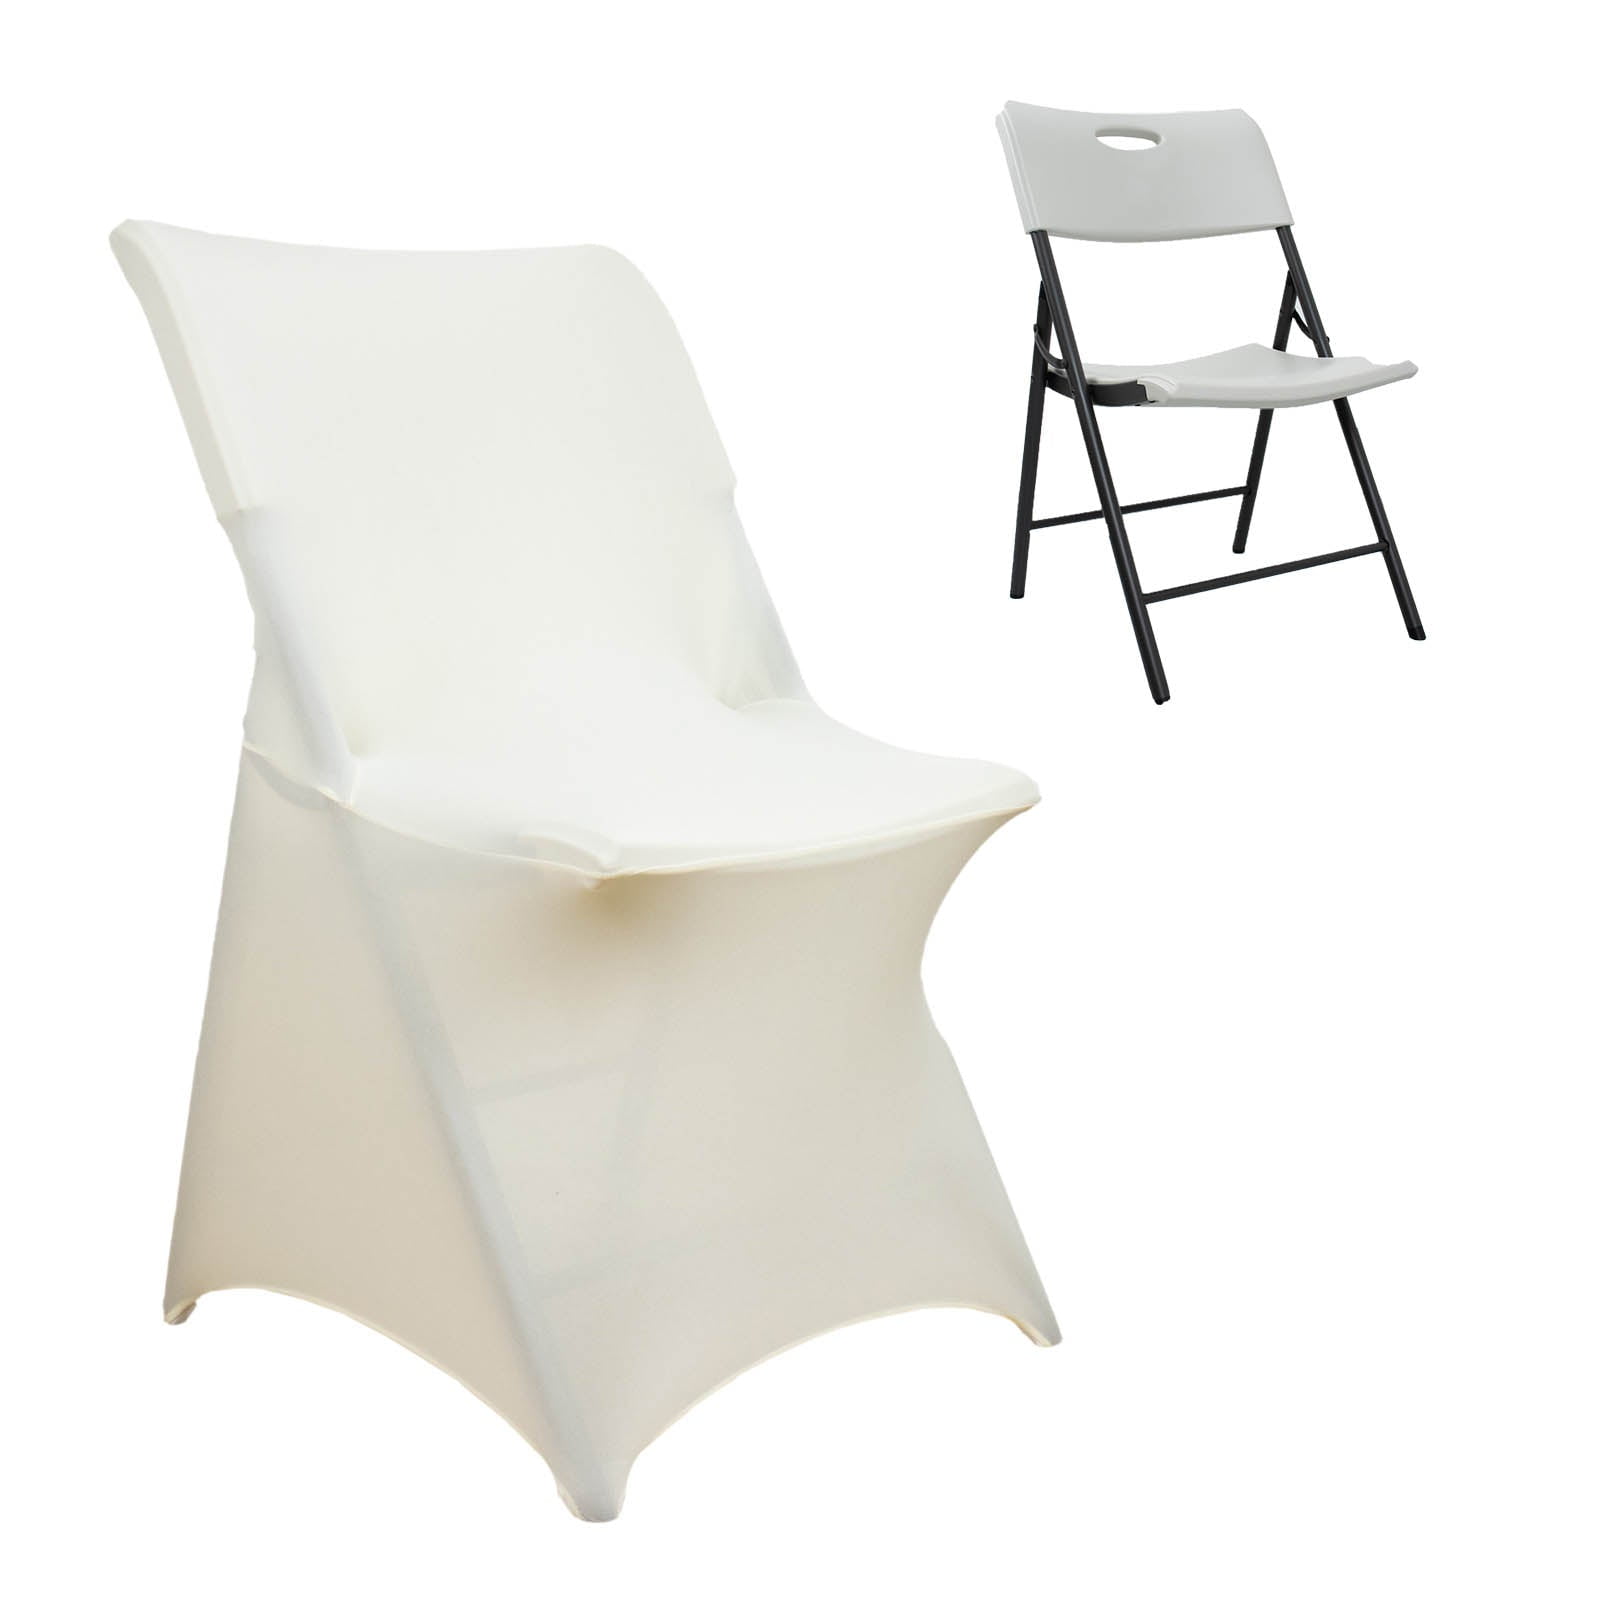 Spandex Folding Chair Covers- Babenest Upgraded 10 PCS Universal